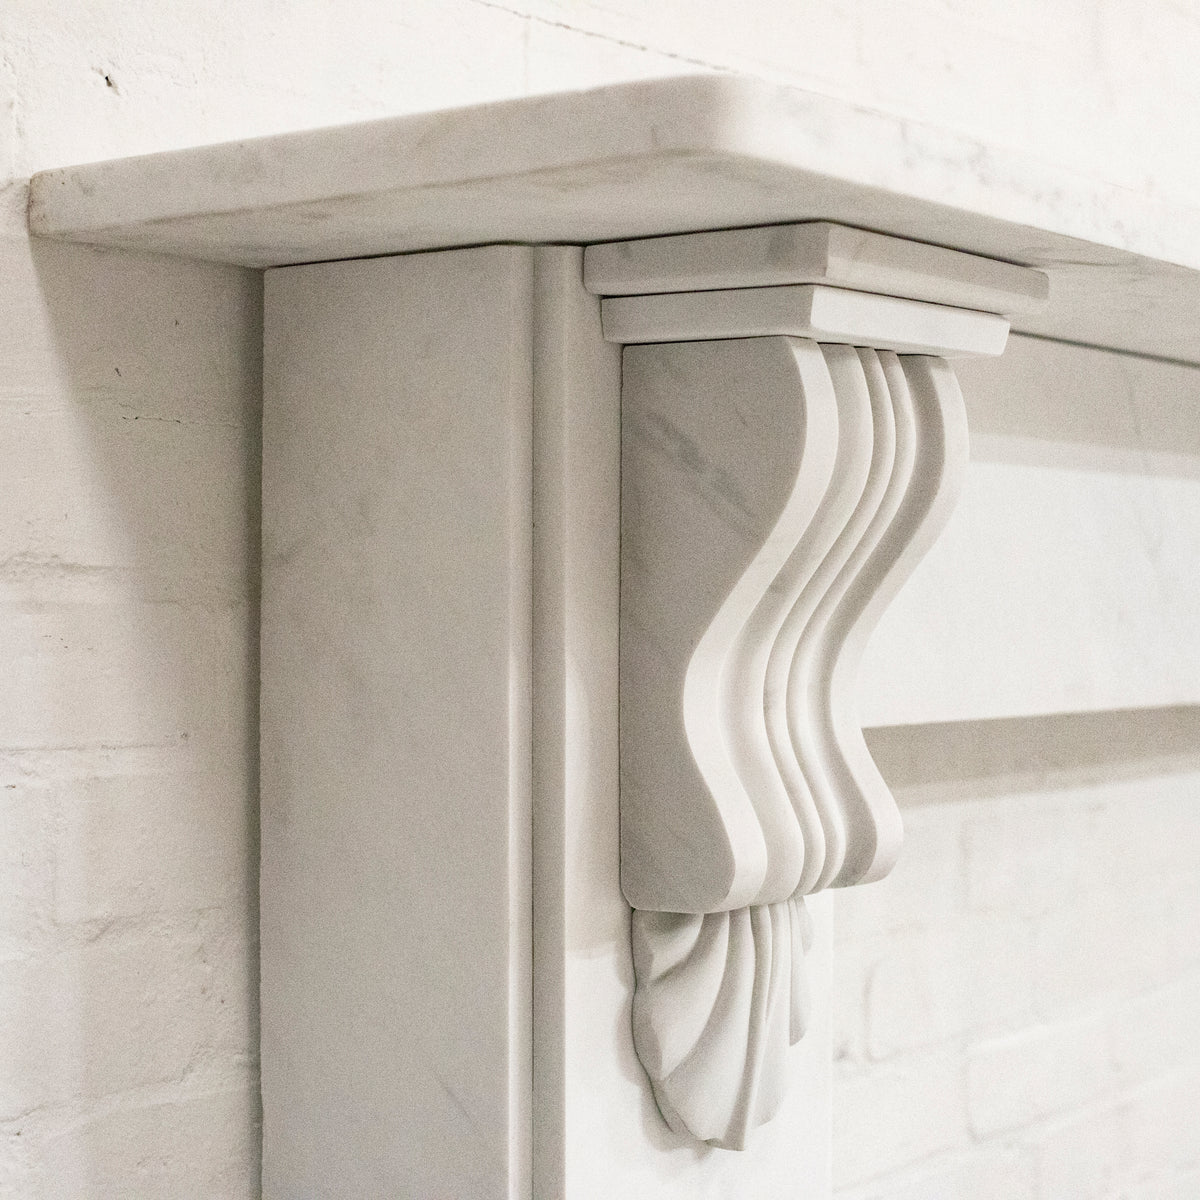 Victorian Style Statuary White Marble Chimneypiece with Corbels | The Architectural Forum